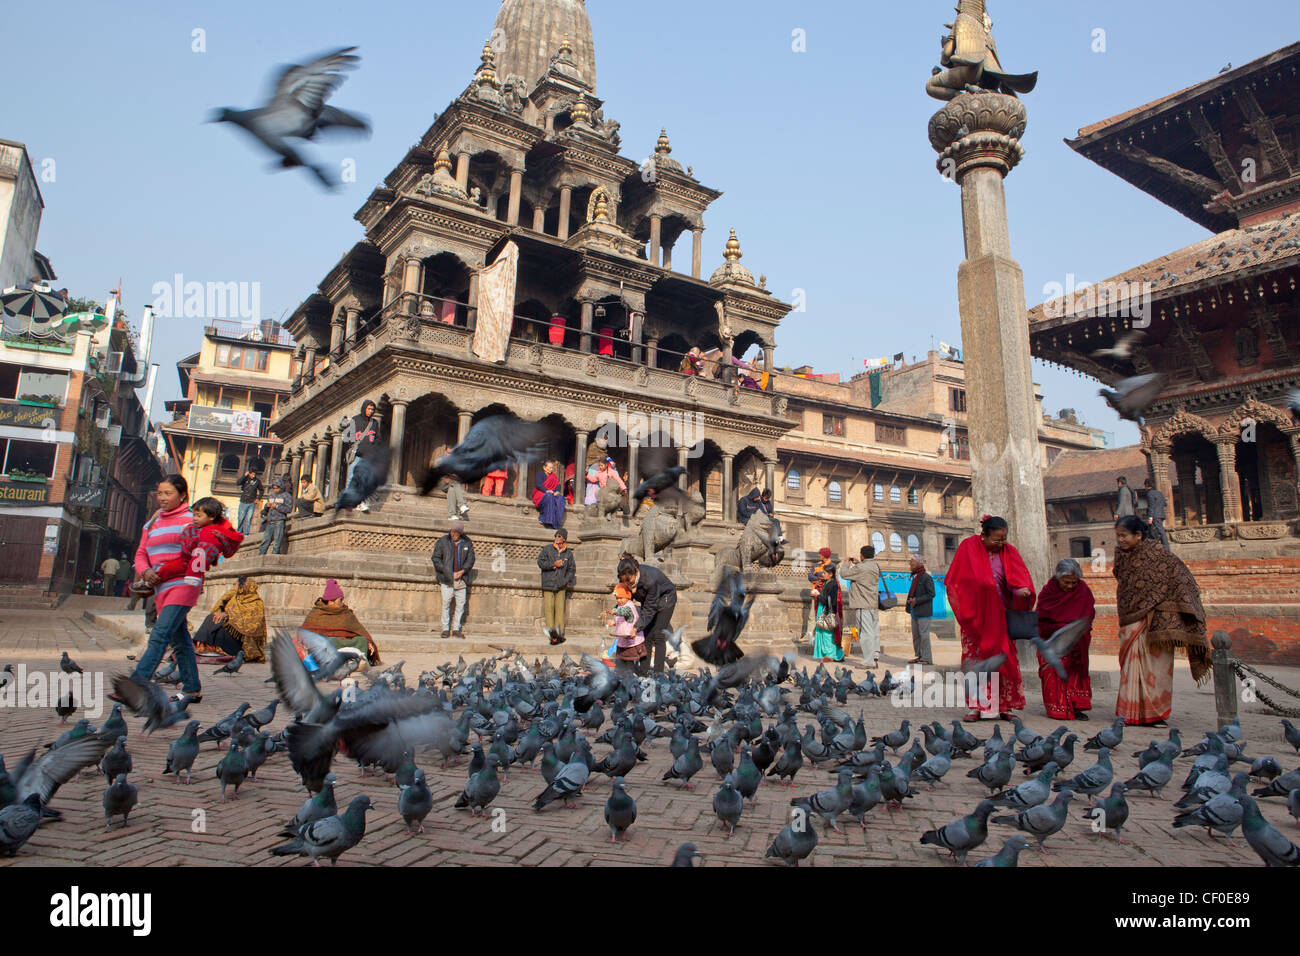 People and pigeons on Durbar Square Patan Nepal Asia Stock Photo